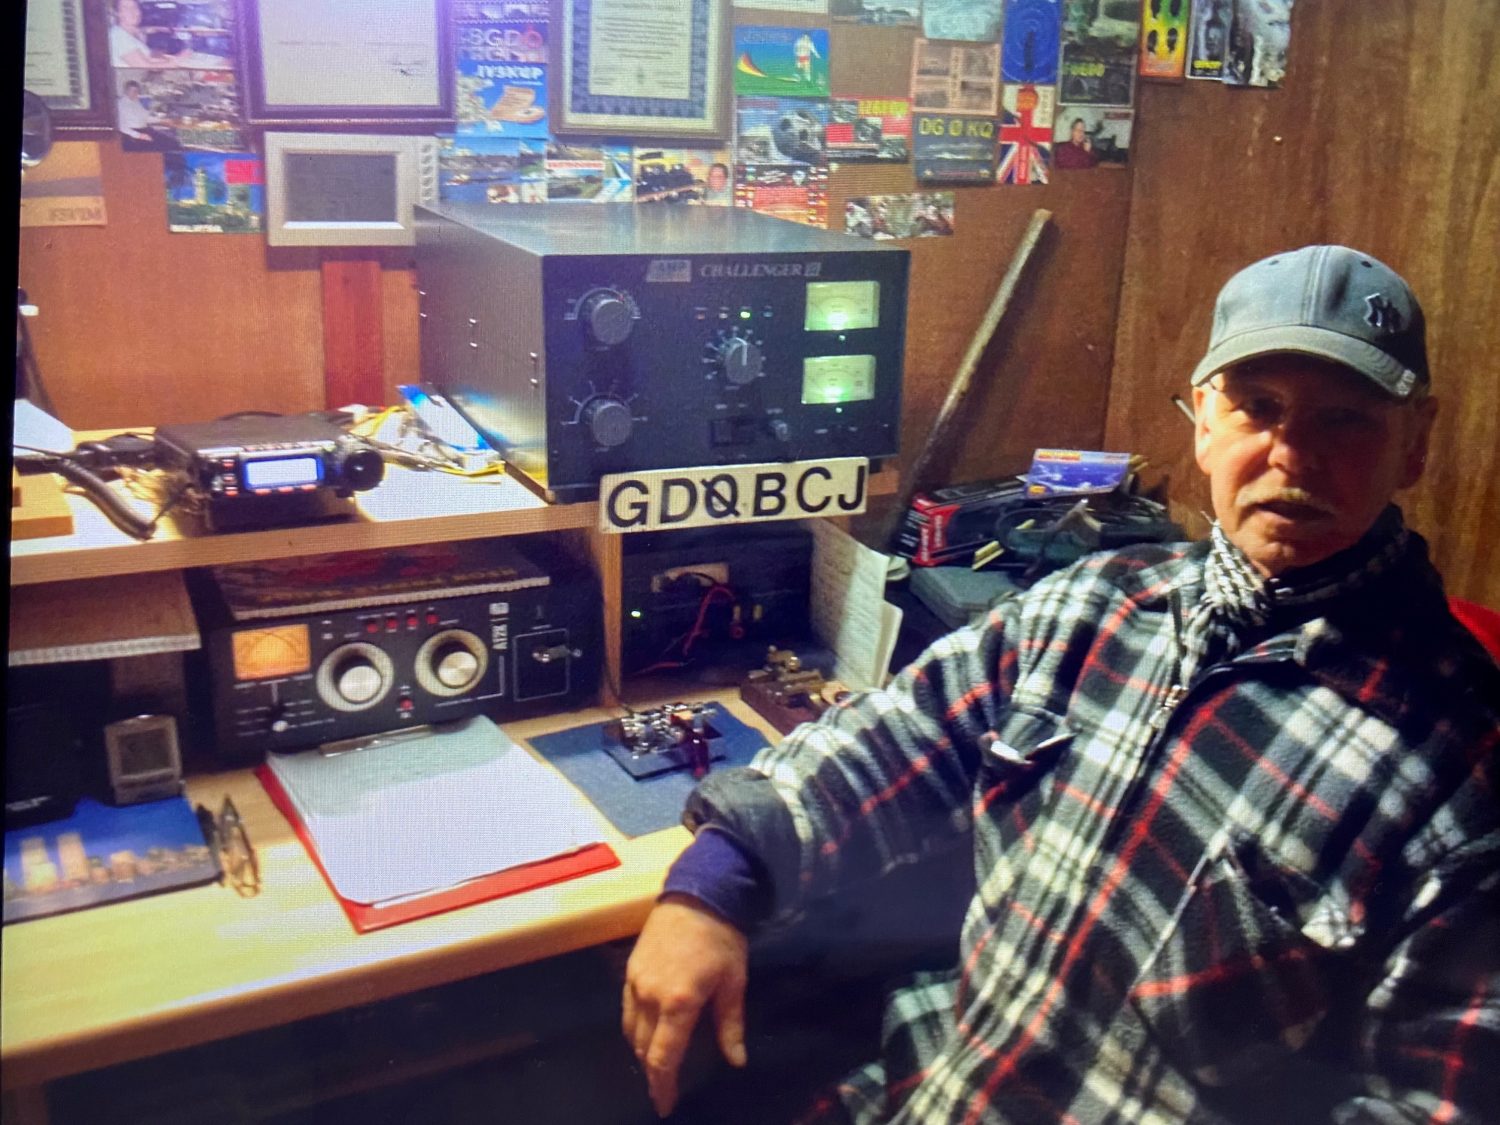 A very relaxed Paul McGrath (GD0BCJ) in his shack.